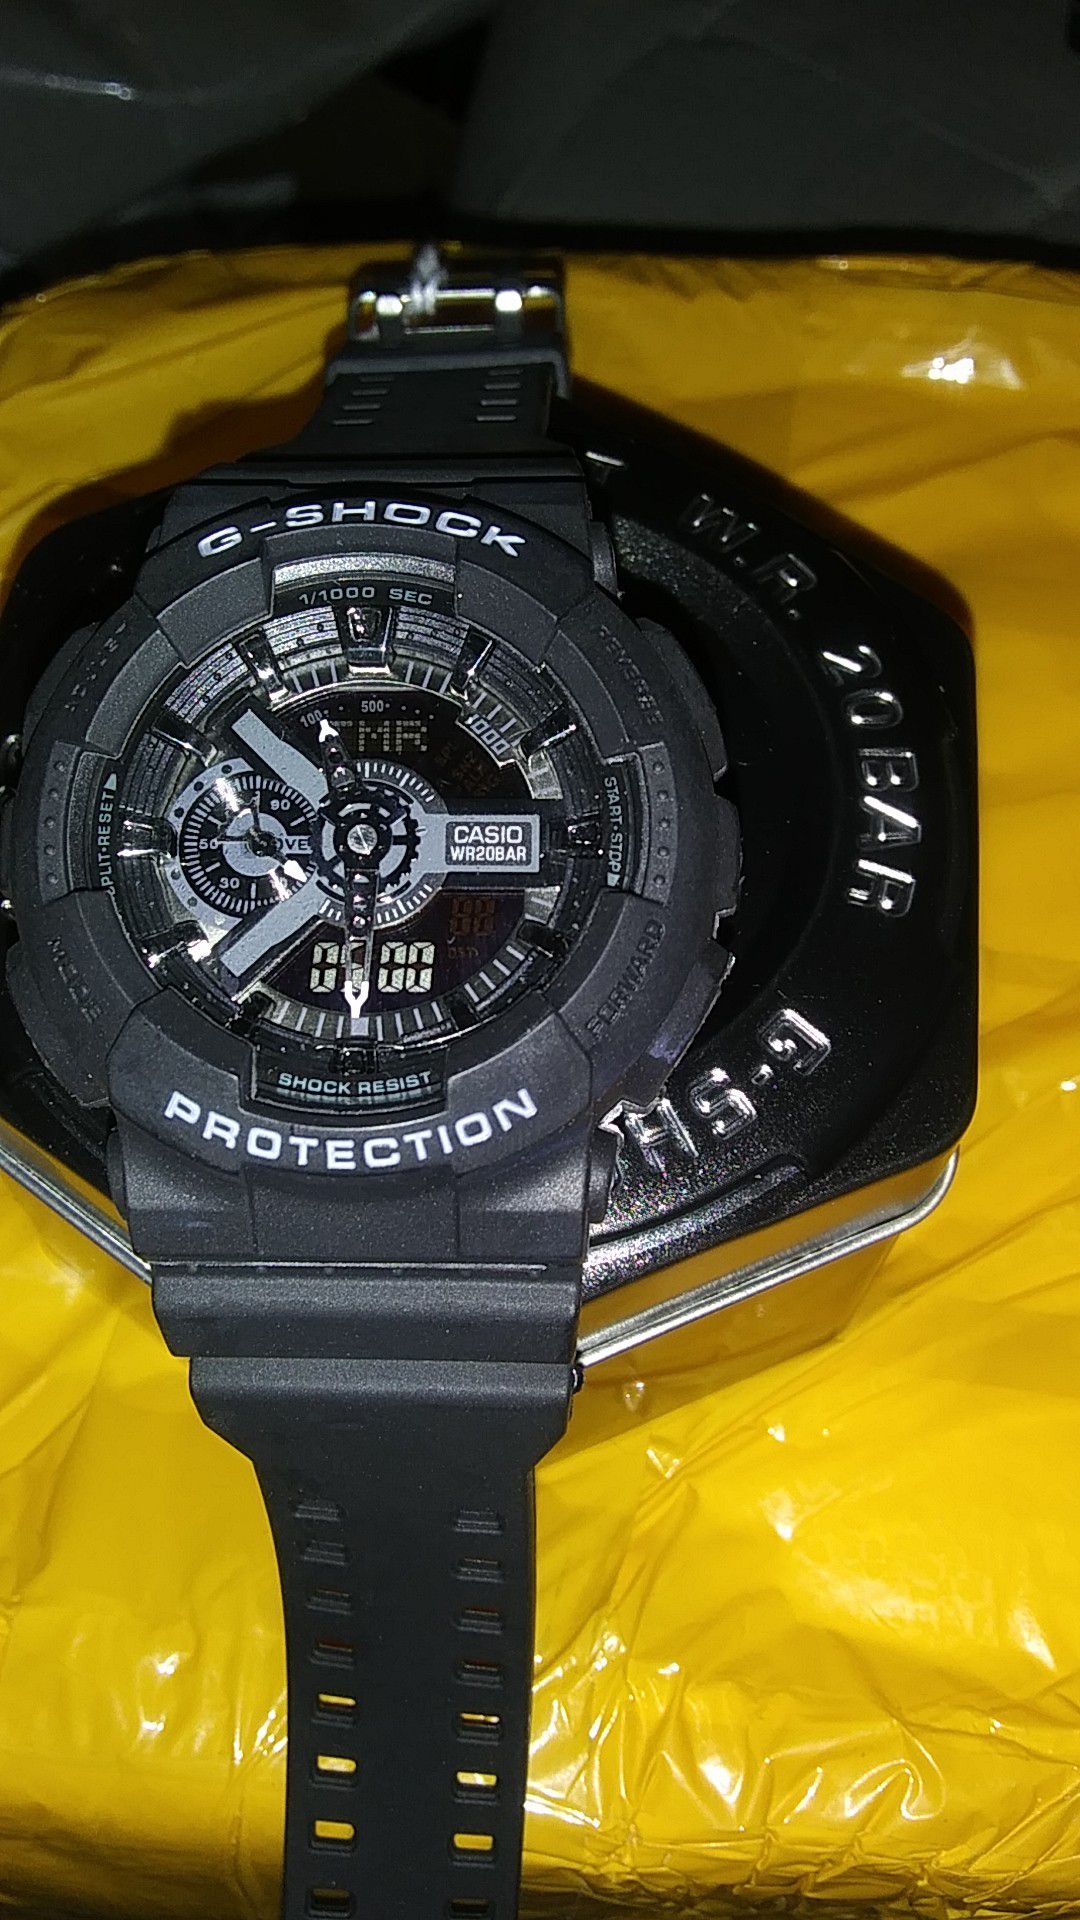 G shock watch with case